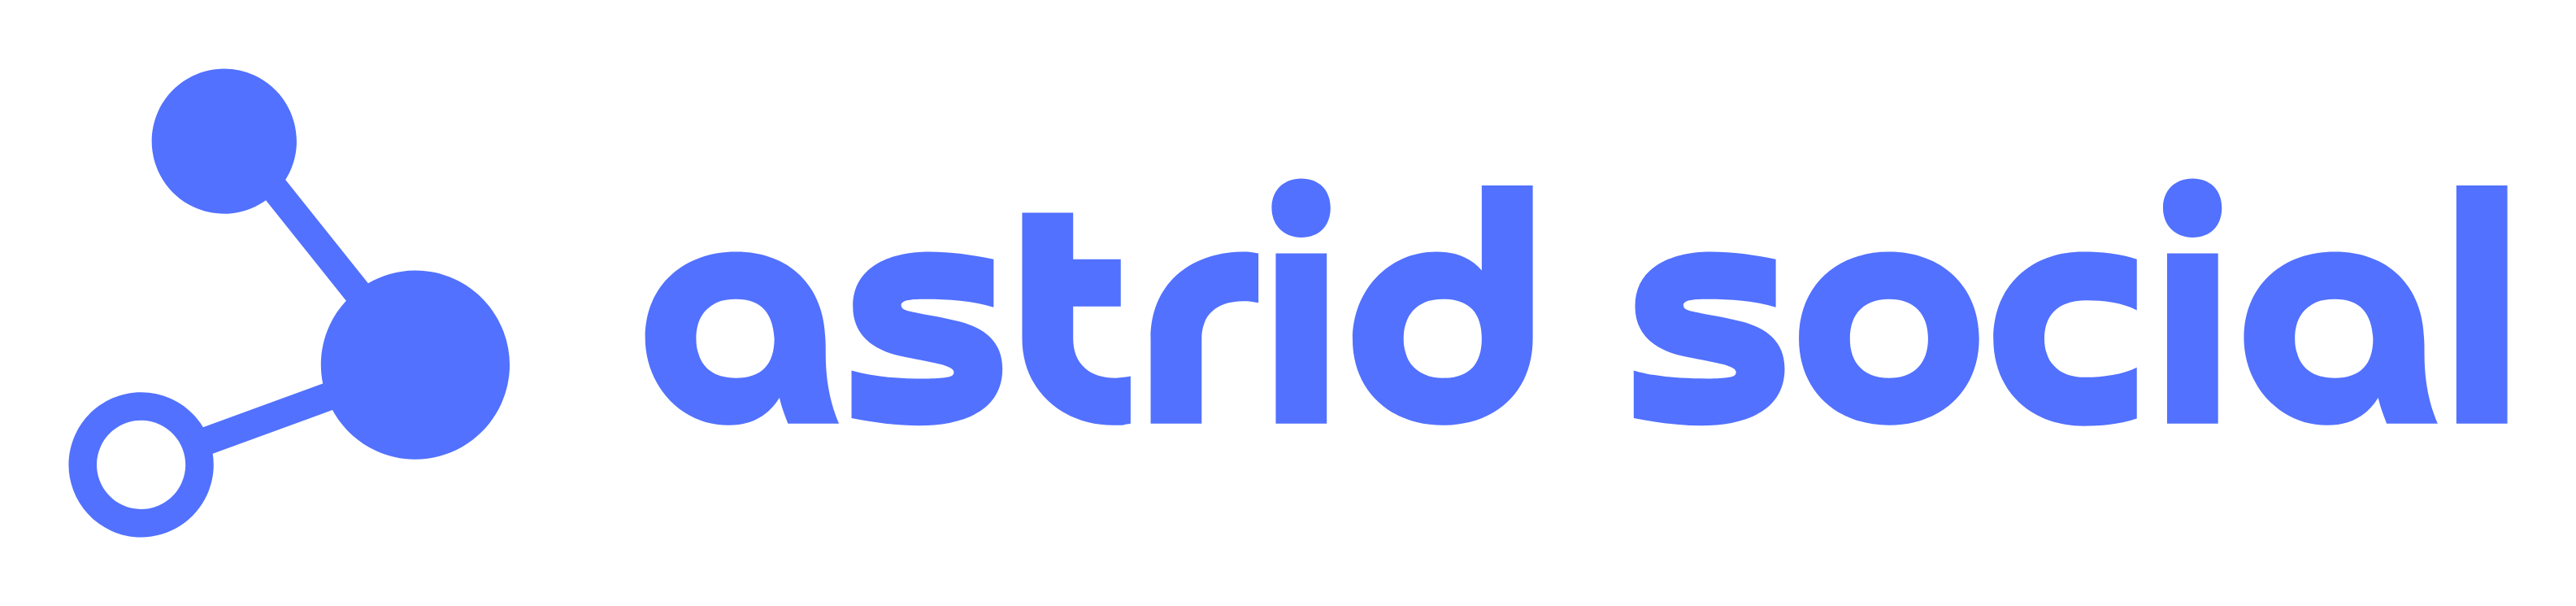 Astrid Social Brand Logo that helps small businesses increase their online presence and boost growth